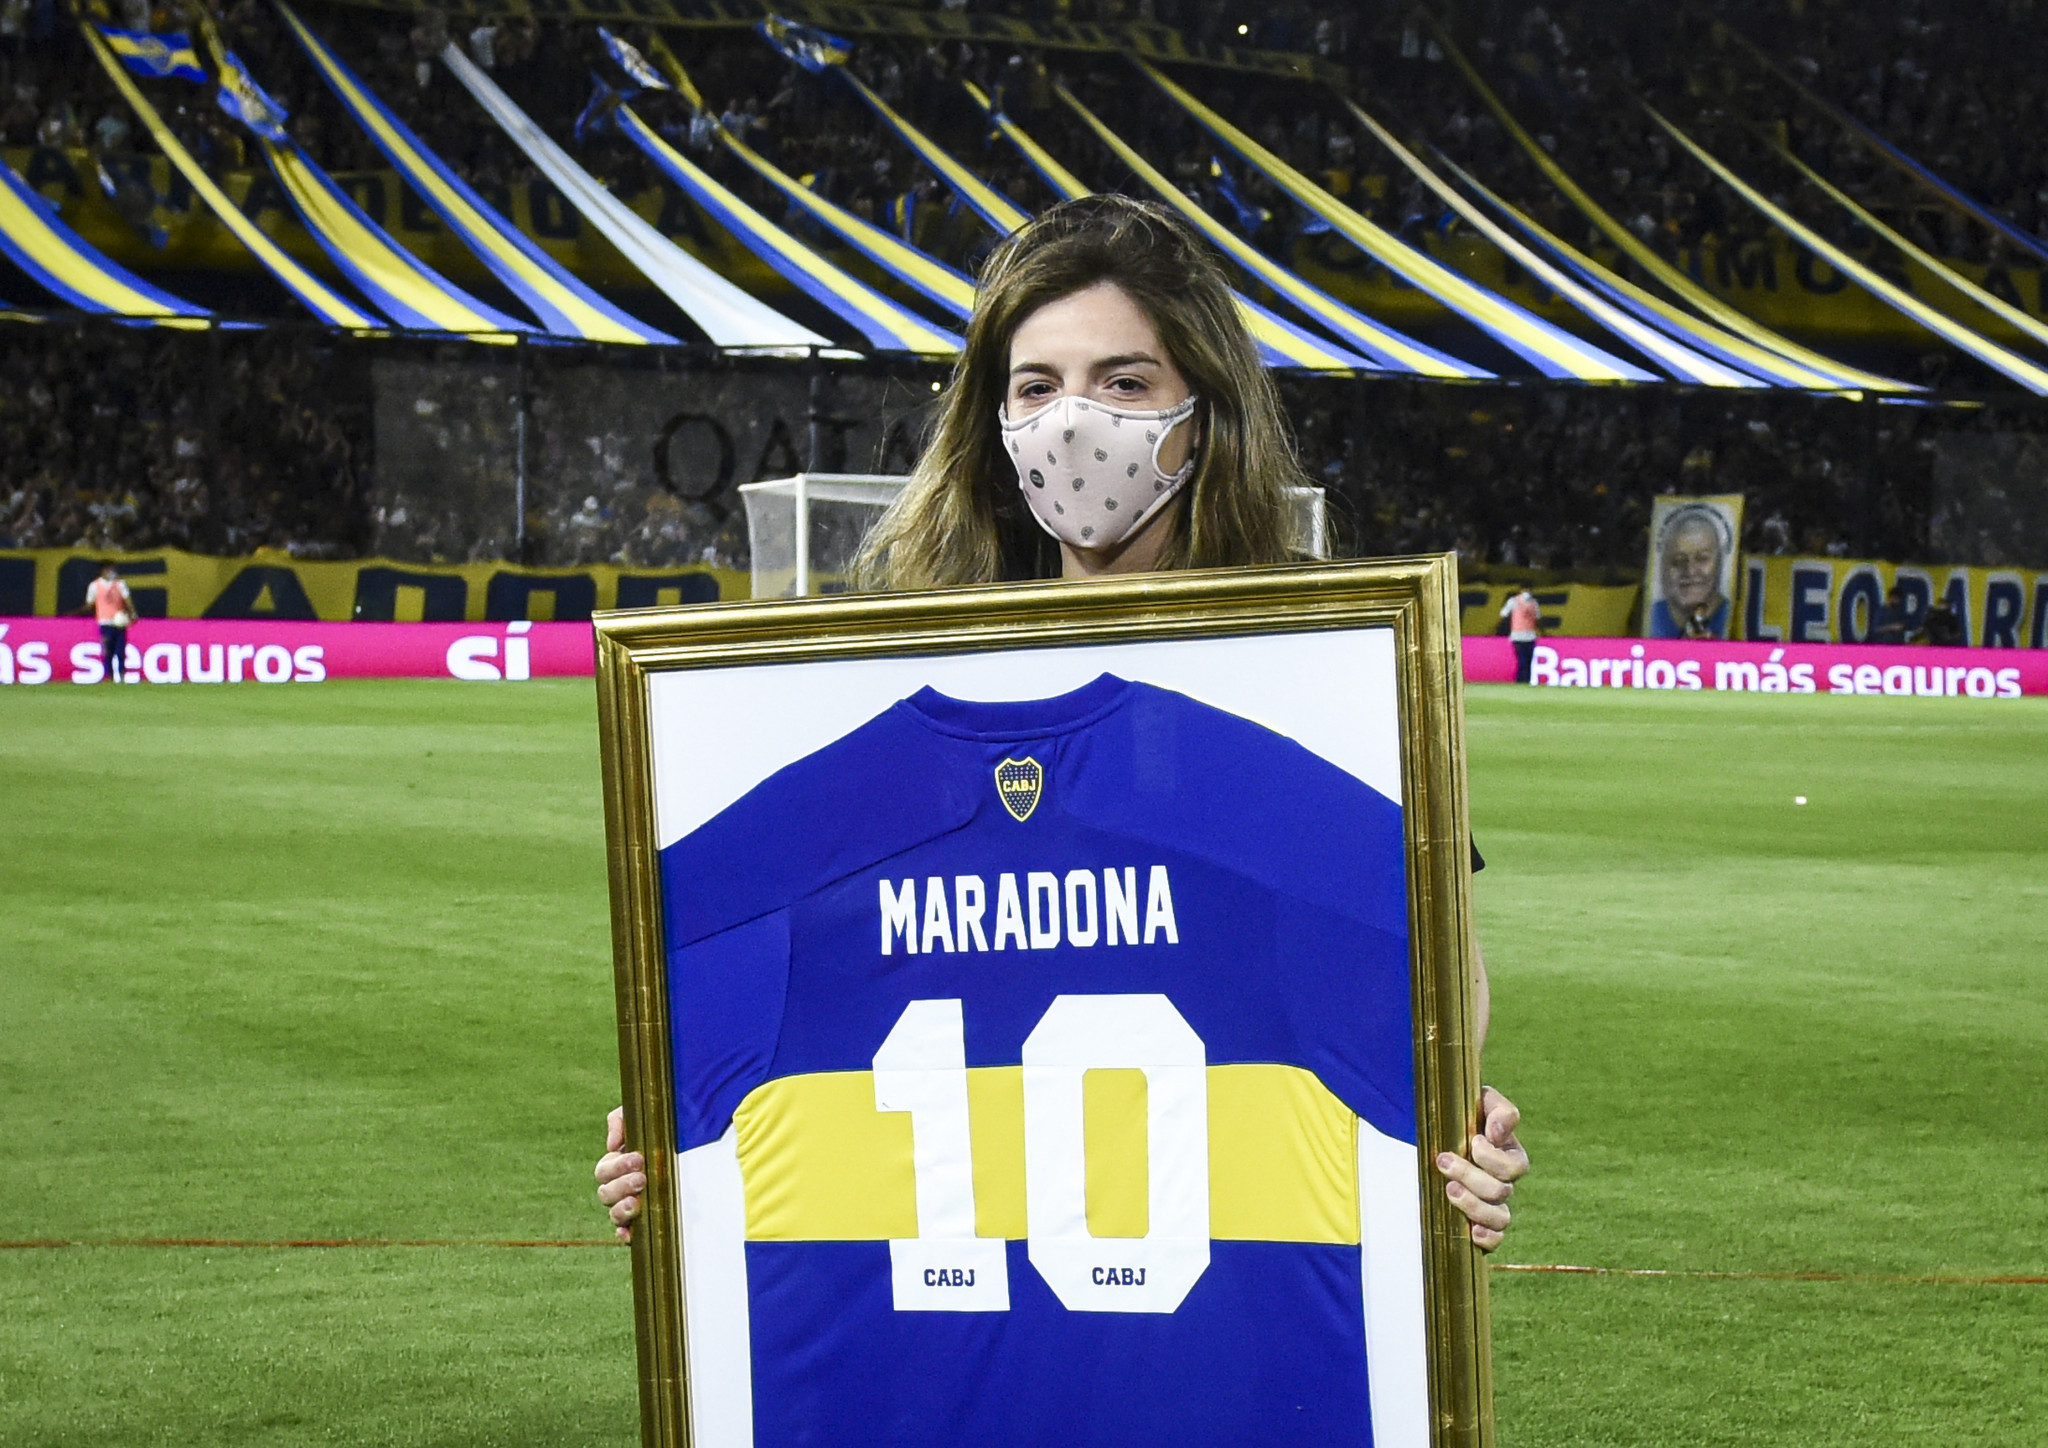 Dalma Maradona disputes Steve Hodge's belief that he has the right shirt worn by her father ©Getty Images 